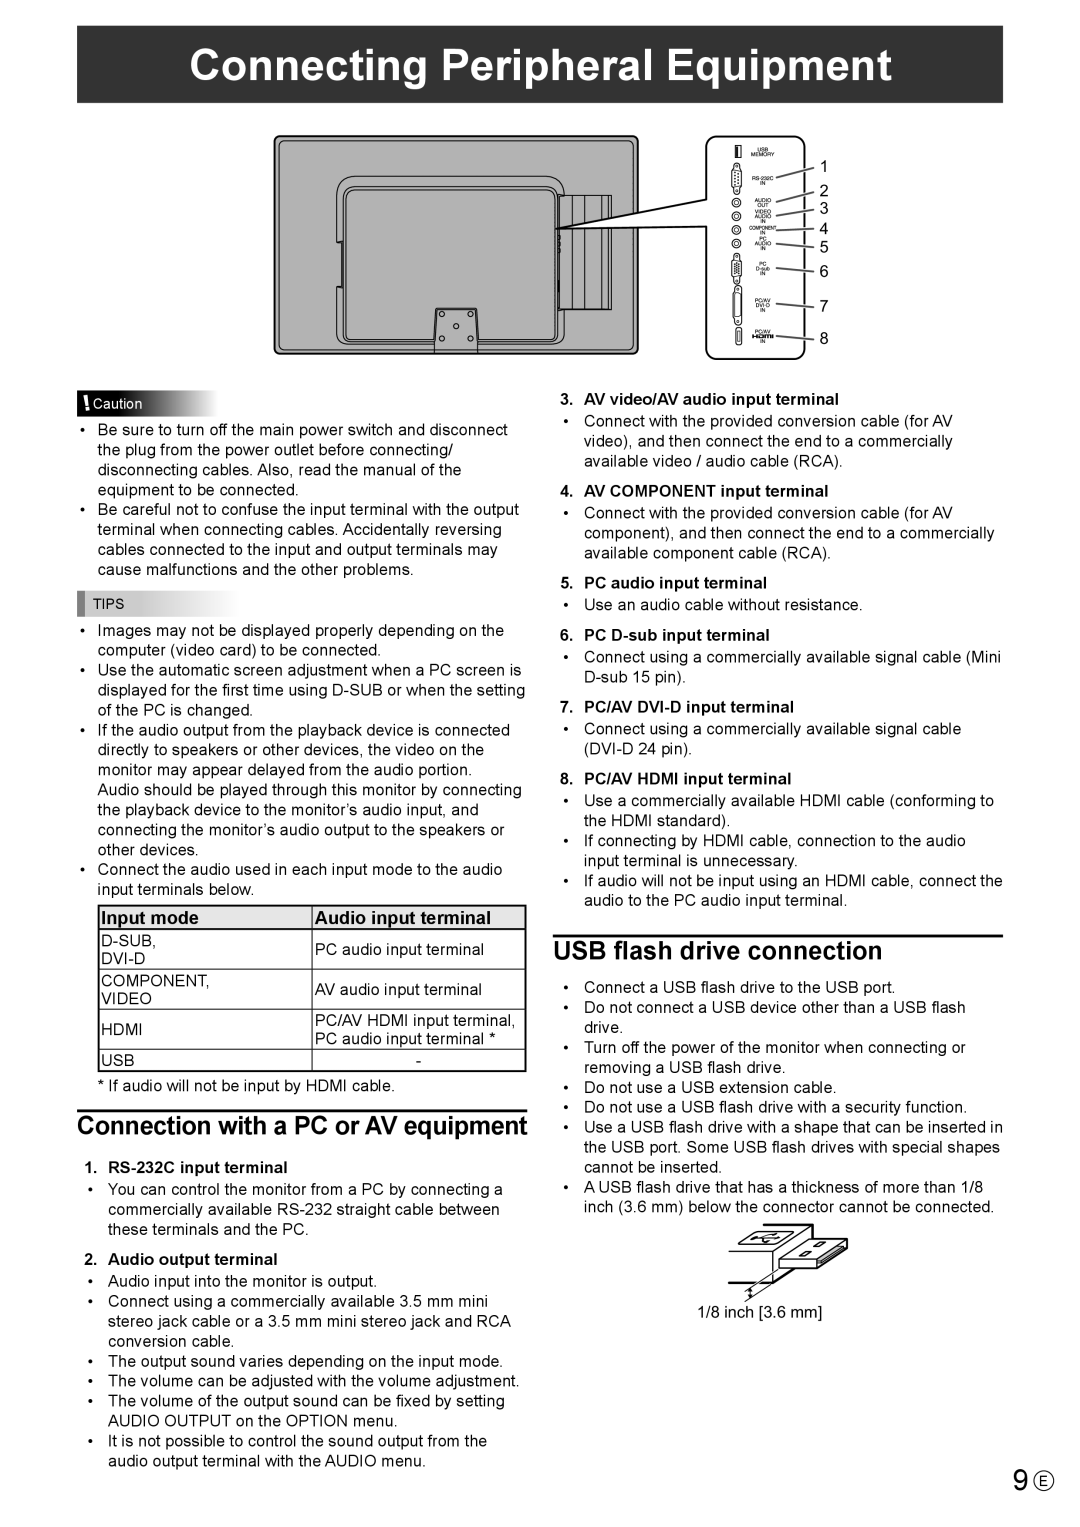 Sharp PN-T321 operation manual Connecting Peripheral Equipment, USB flash drive connection 